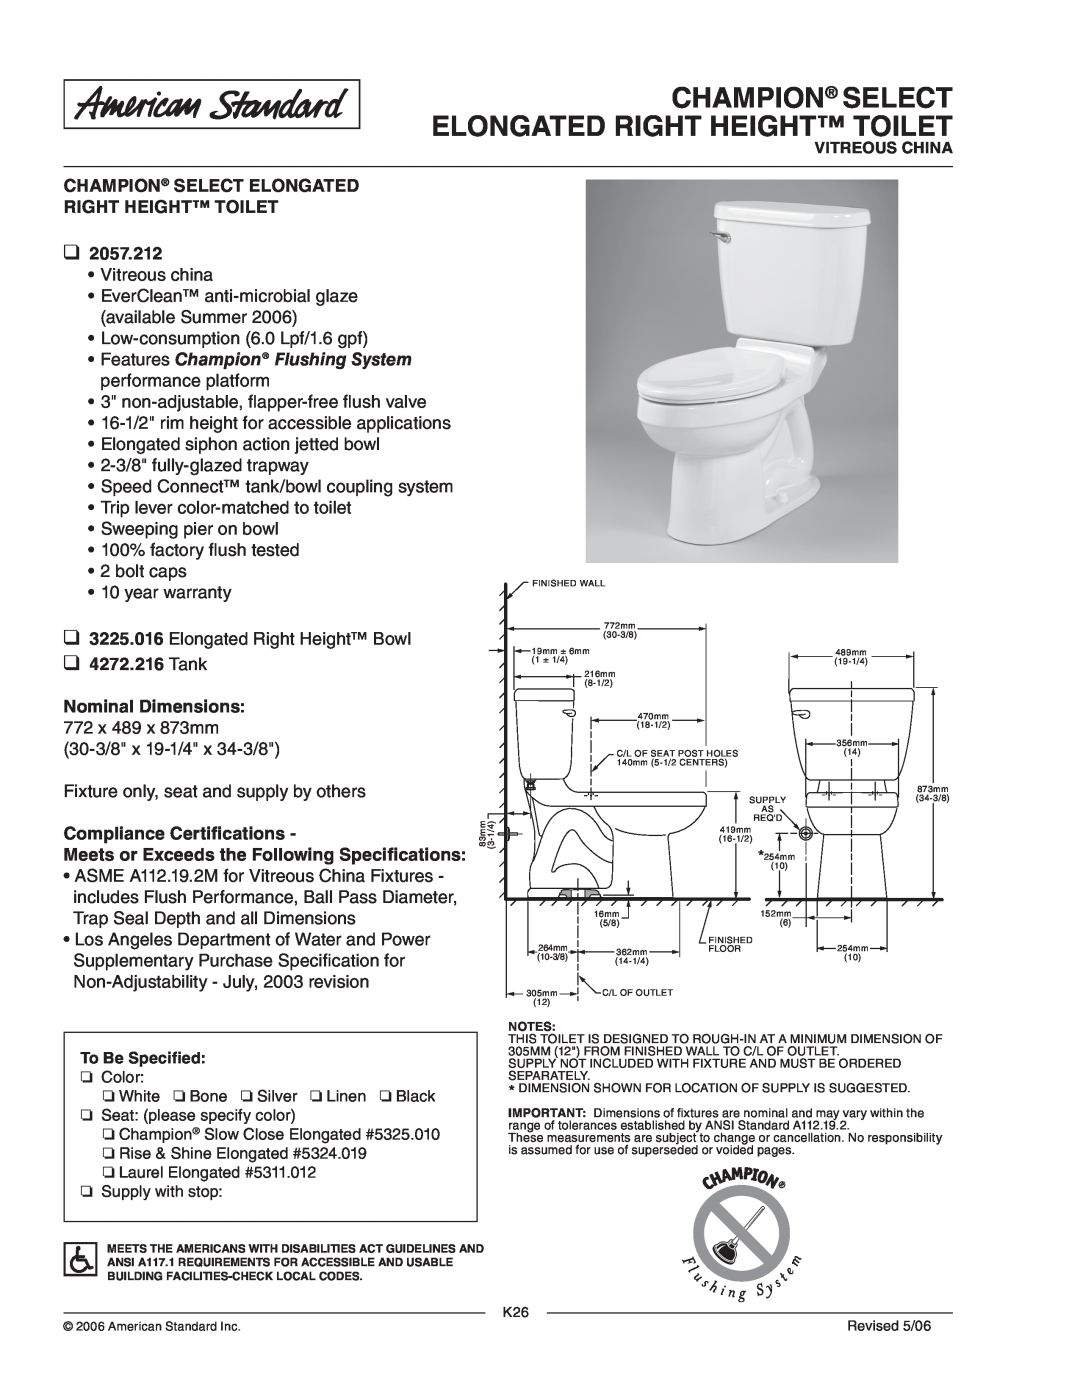 American Standard 2057.212 dimensions Champion Select Elongated Right Height Toilet, Tank Nominal Dimensions 